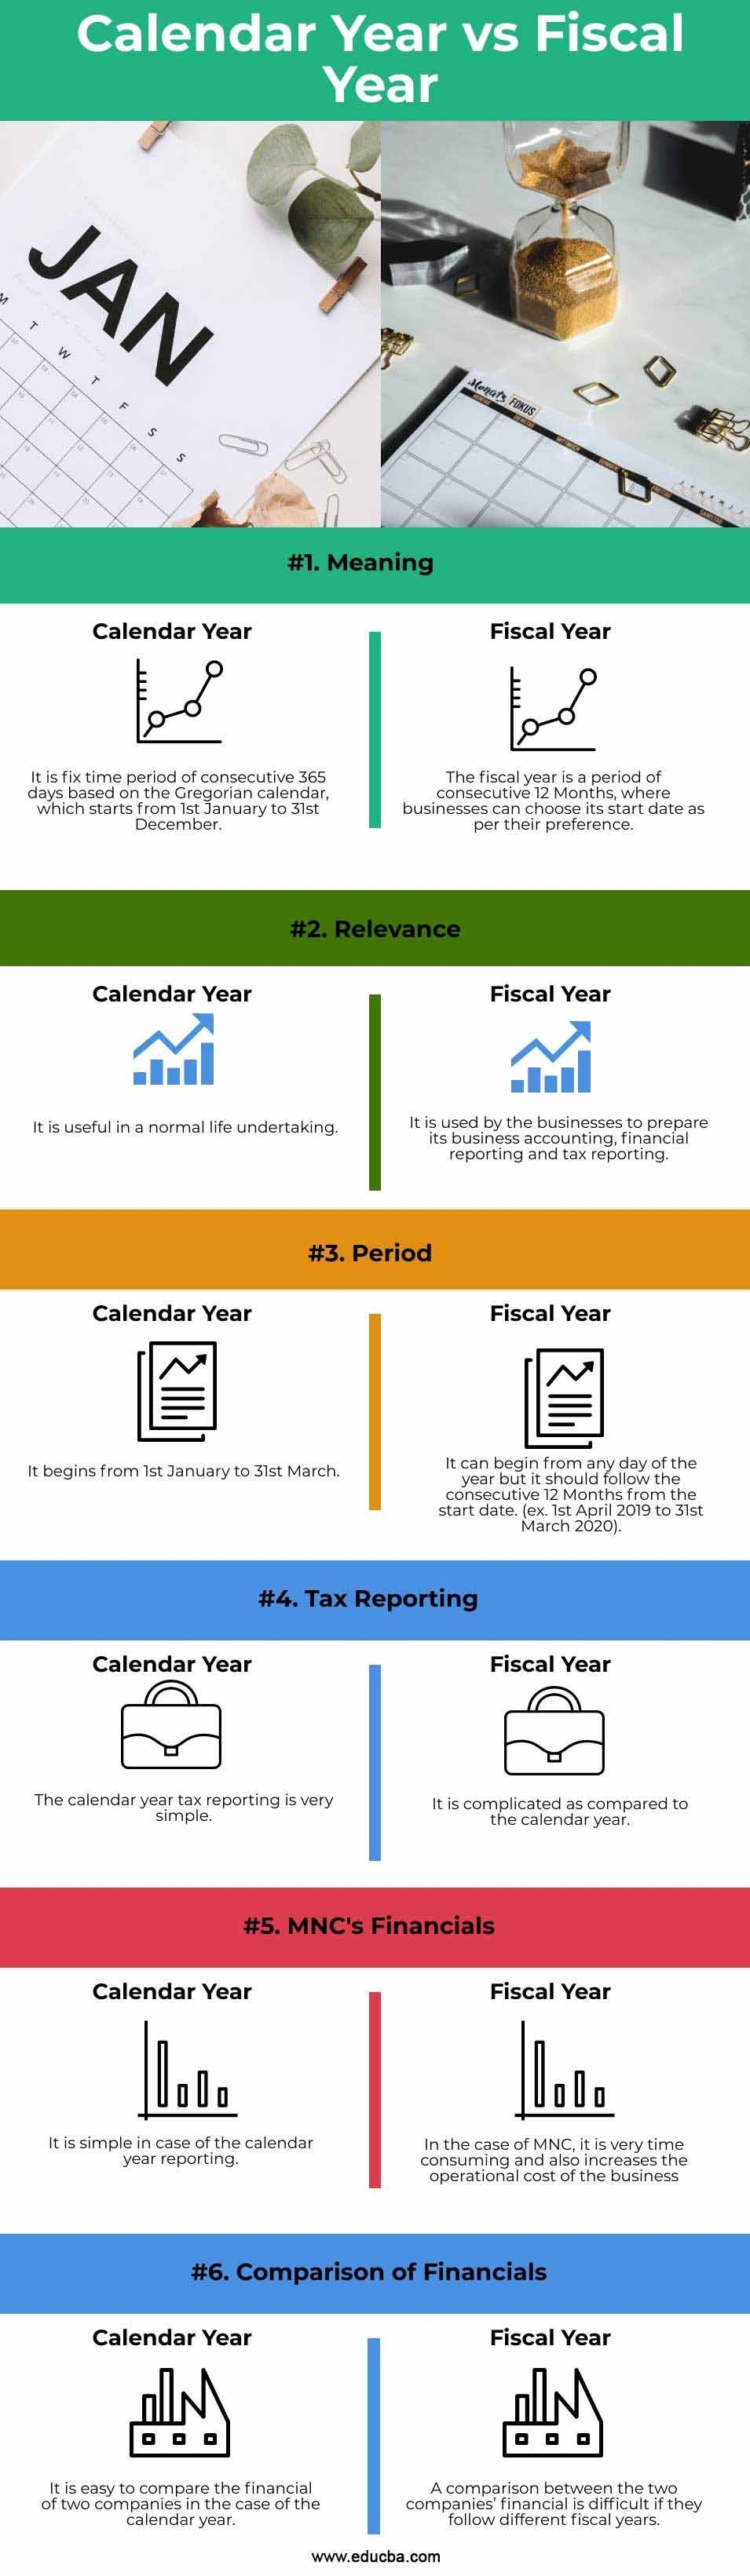 Calendar Year Vs Fiscal Year | Top 6 Differences You Should Know